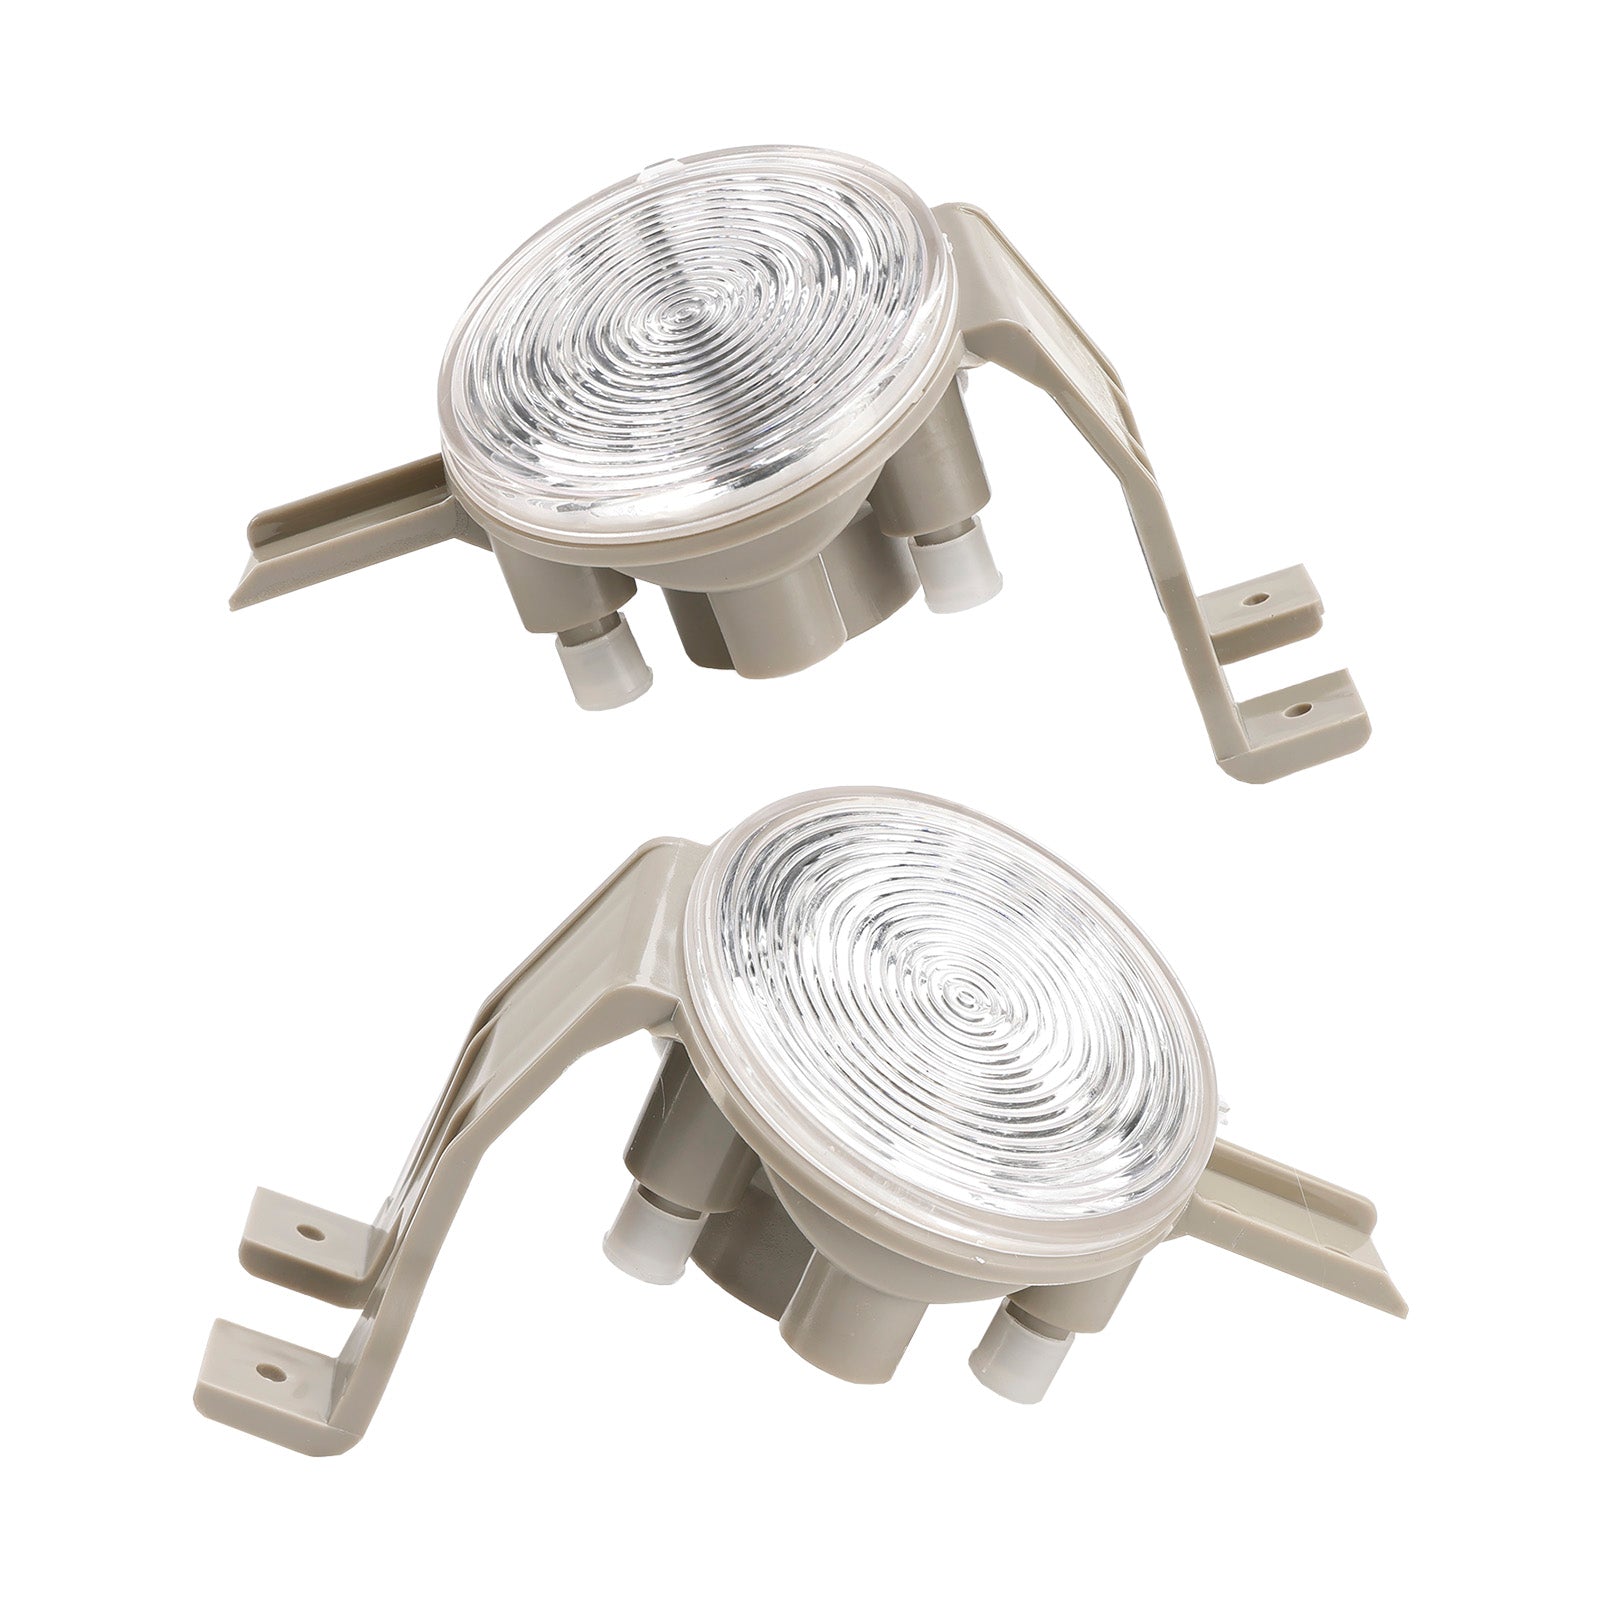 2001.06-2006.09 MINI R50 R53 Pair of Front Indicator Light Lamp Flasher Clear Lens